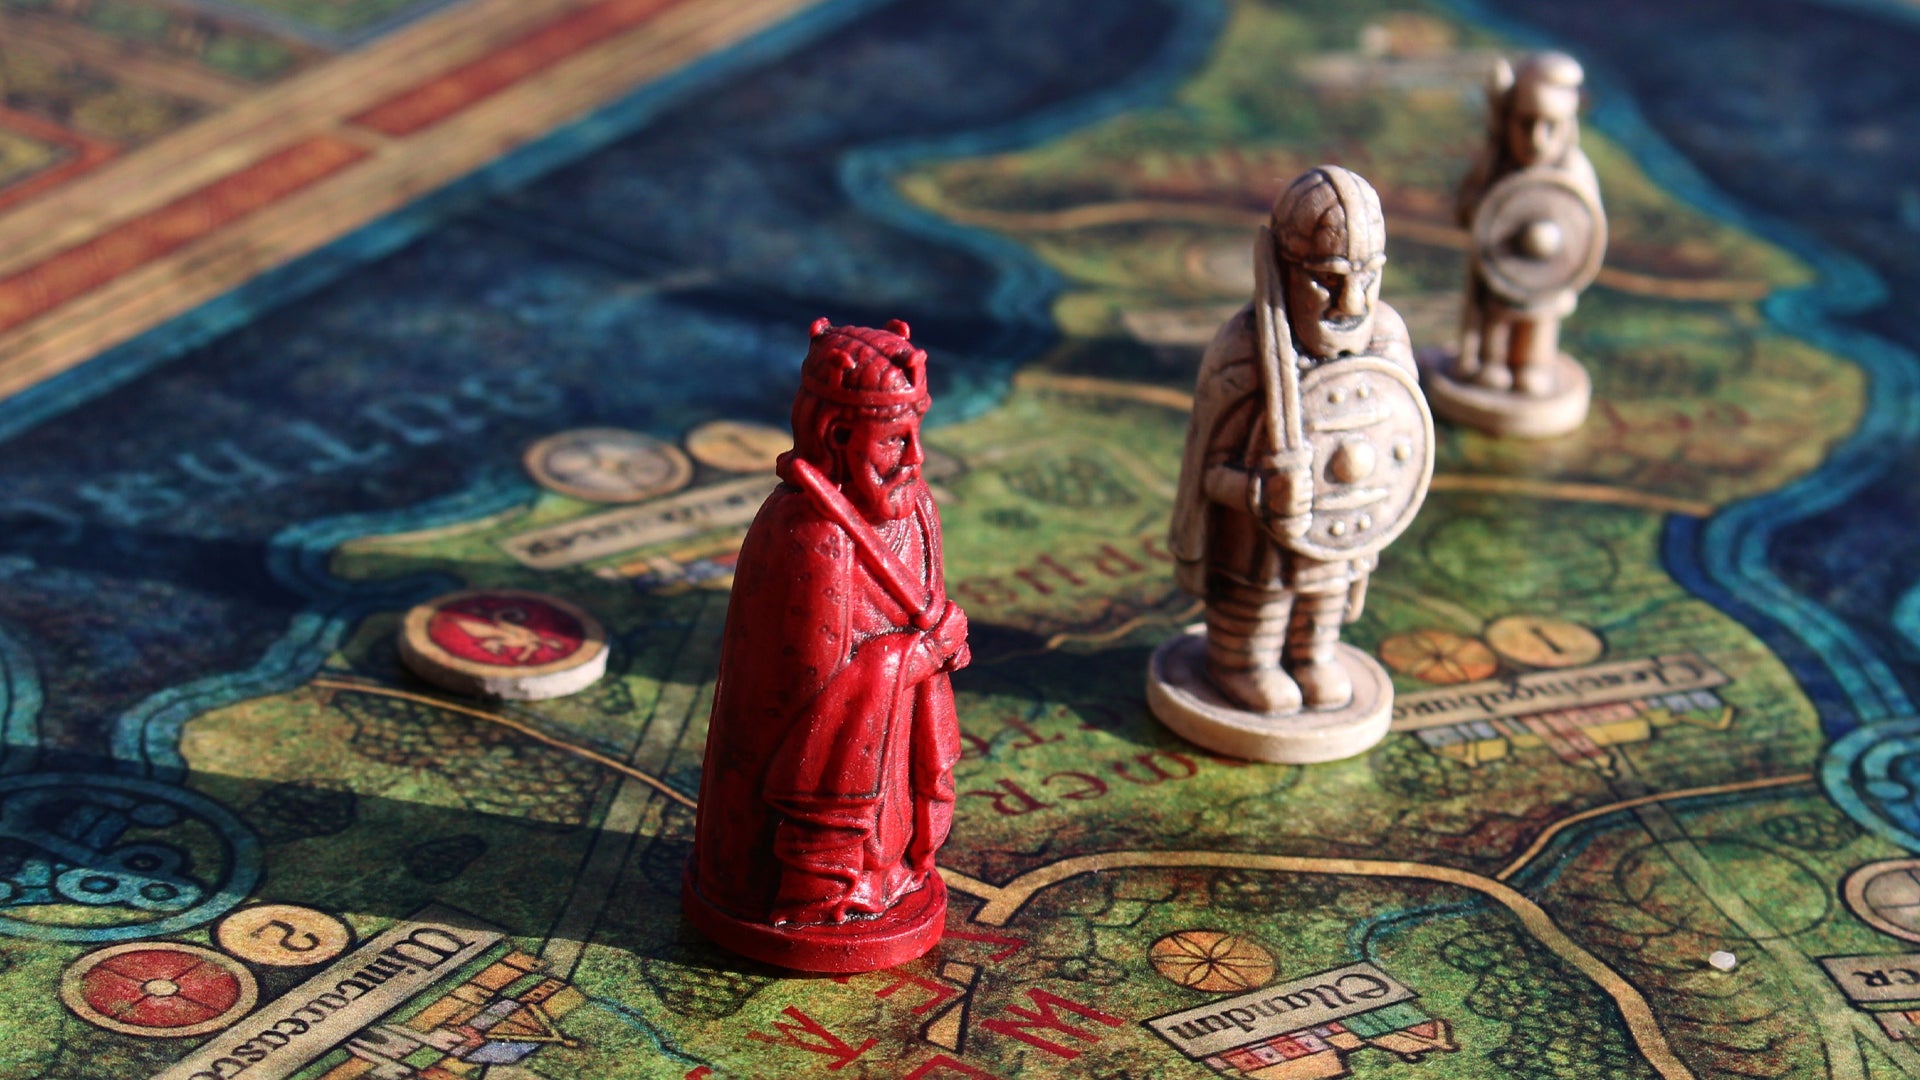 Image for The world’s most famous chess set inspires a board game in a Game of Thrones-like medieval Britain